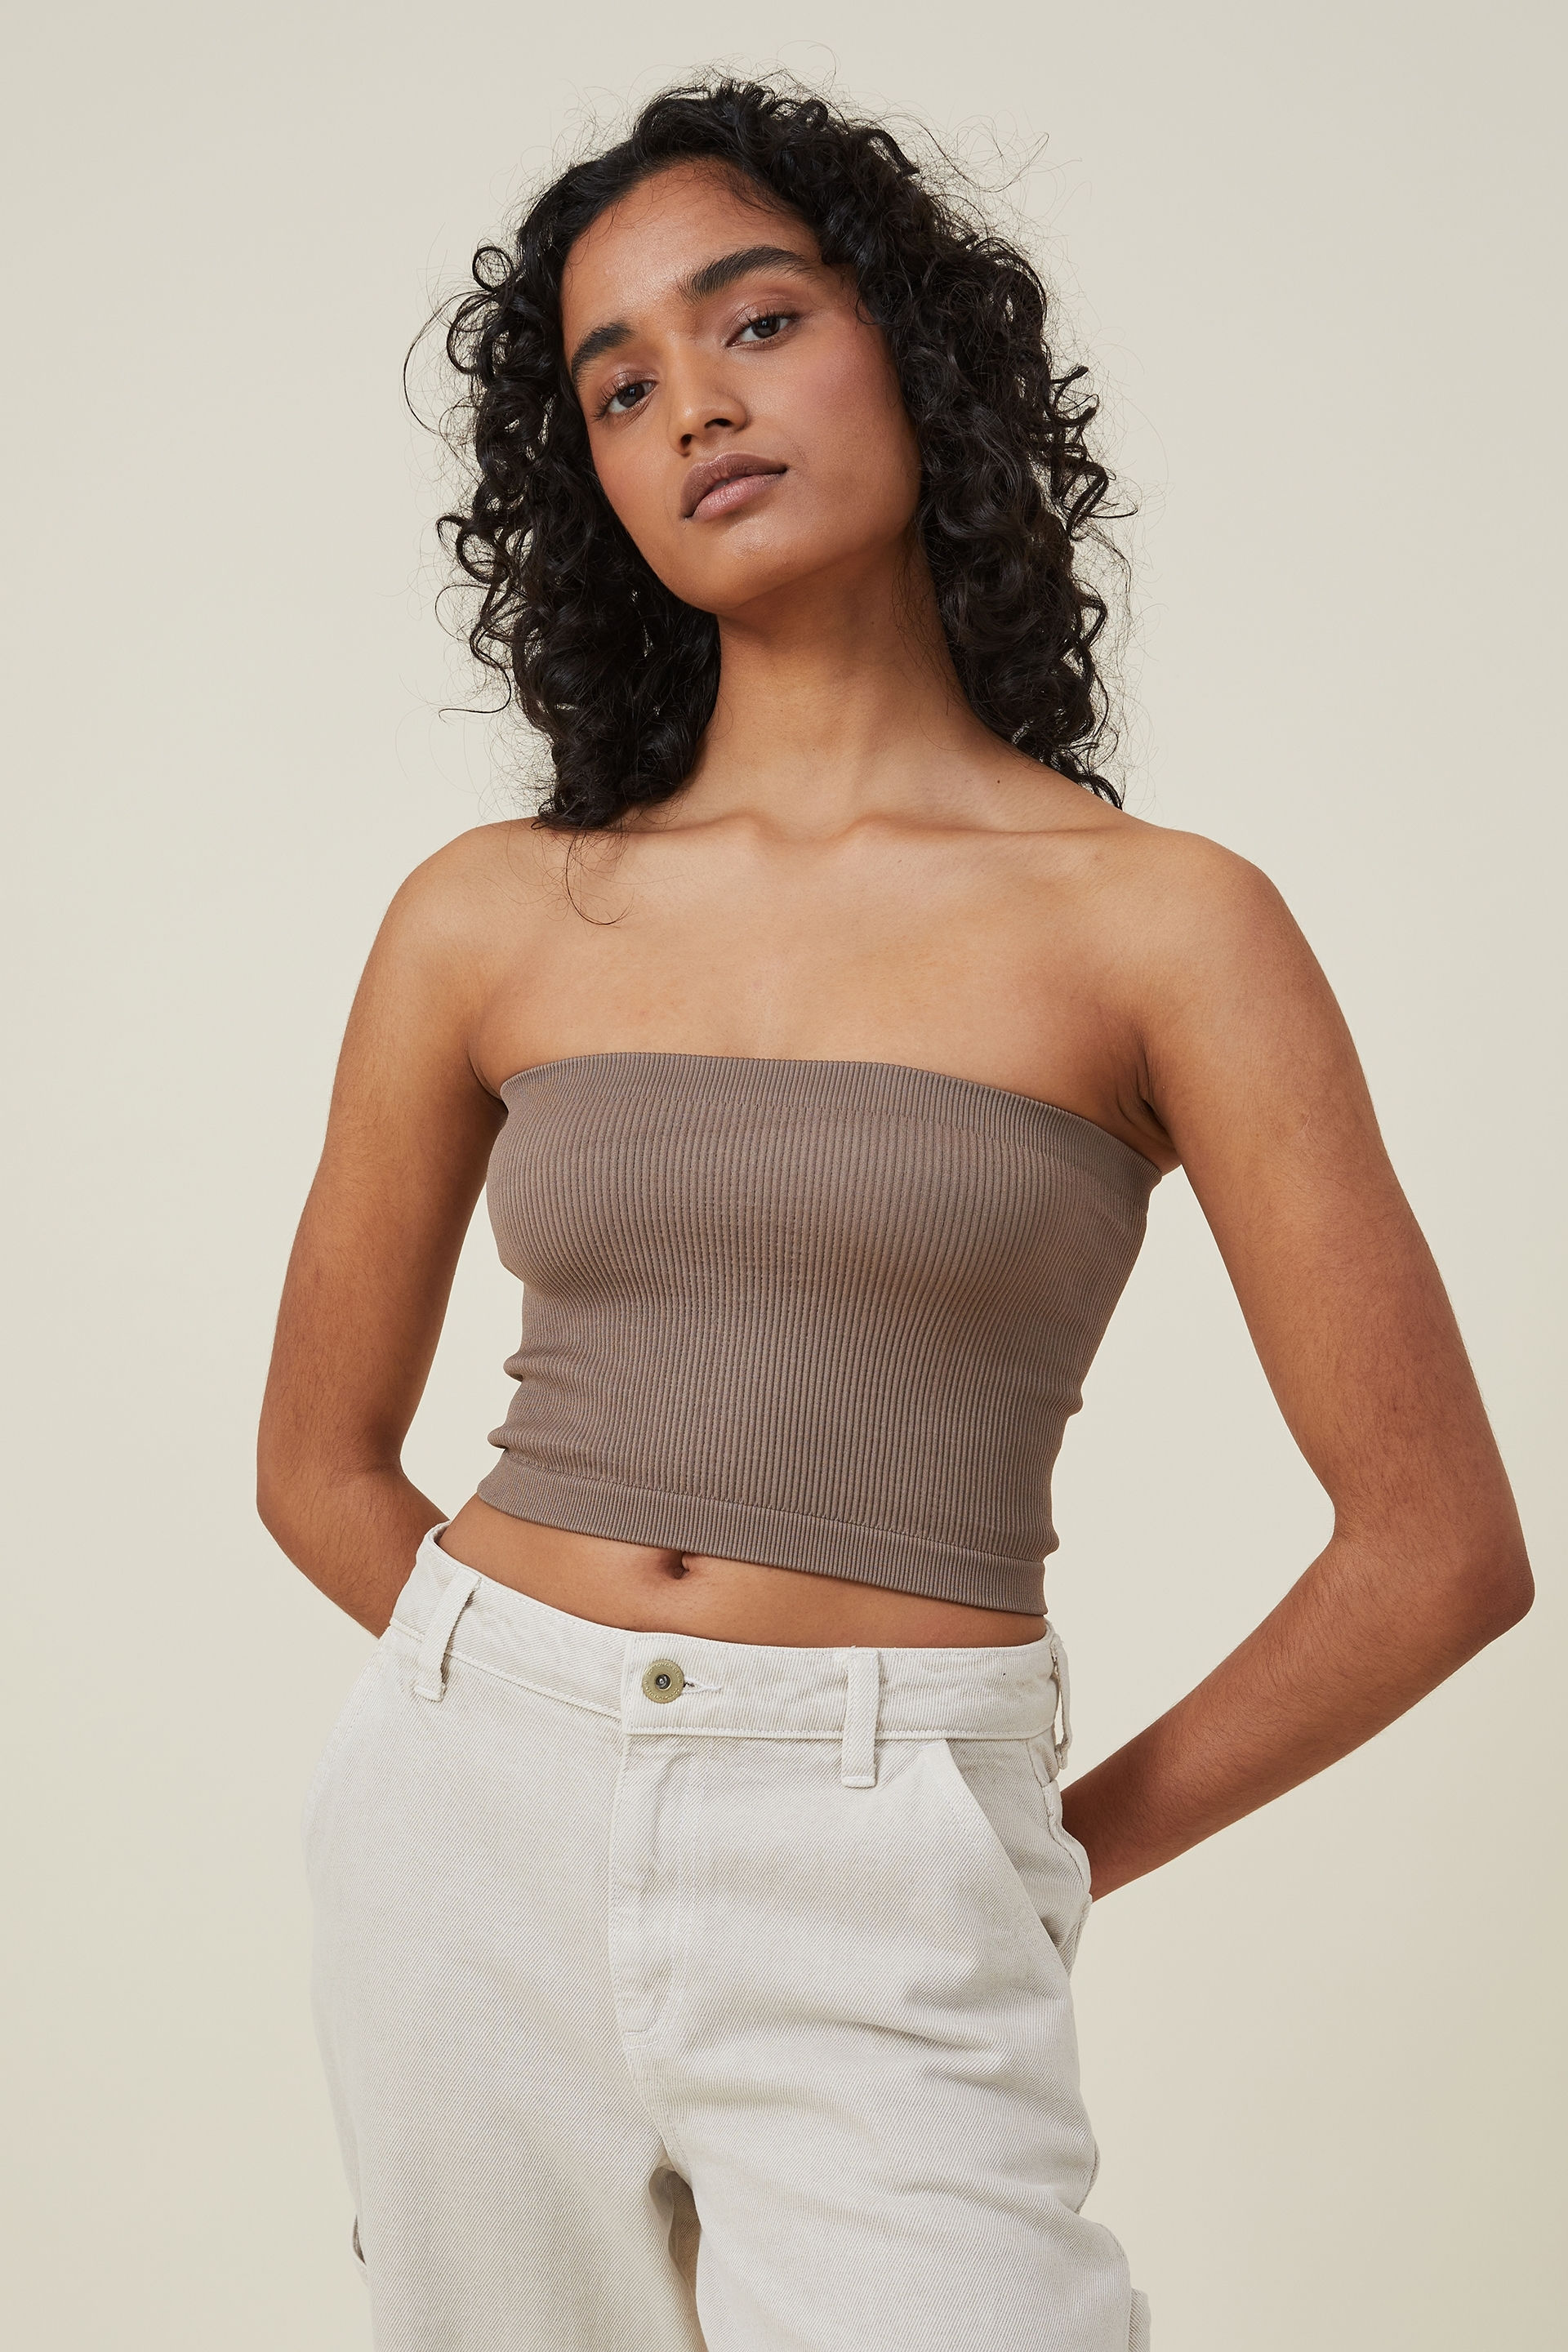 Cotton On Women - Seamless Ellie Tube Top - Rich taupe